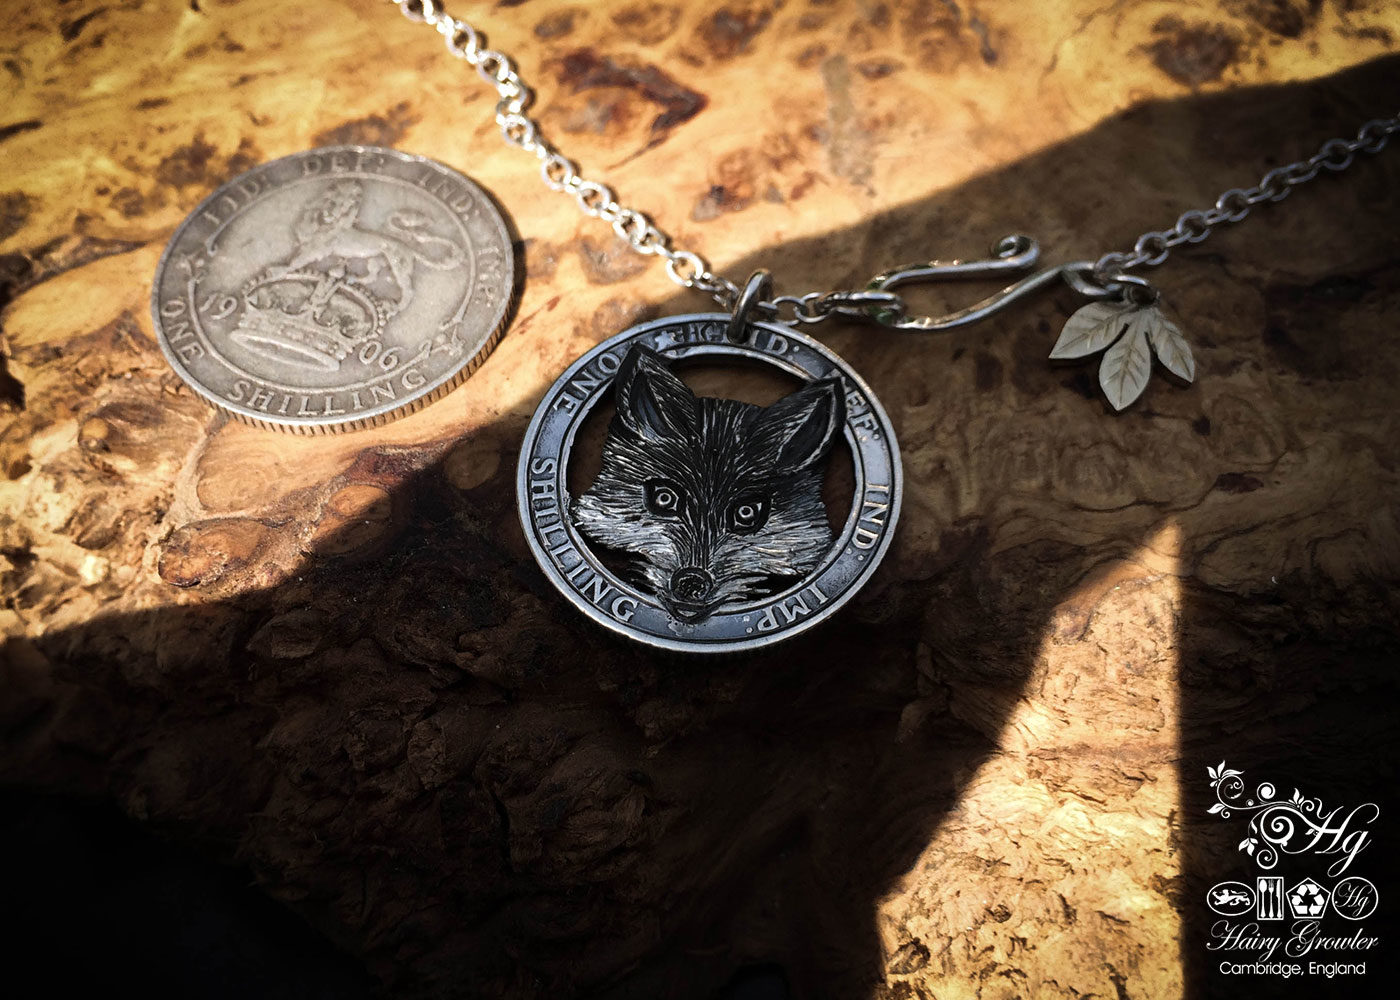 Handcrafted and recycled silver shilling The Silver Shilling collection. silver fox necklace totally handcrafted and recycled from old sterling silver shilling coins. Designed and created by Hairy Growler Jewellery, Cambridge, UK. necklace